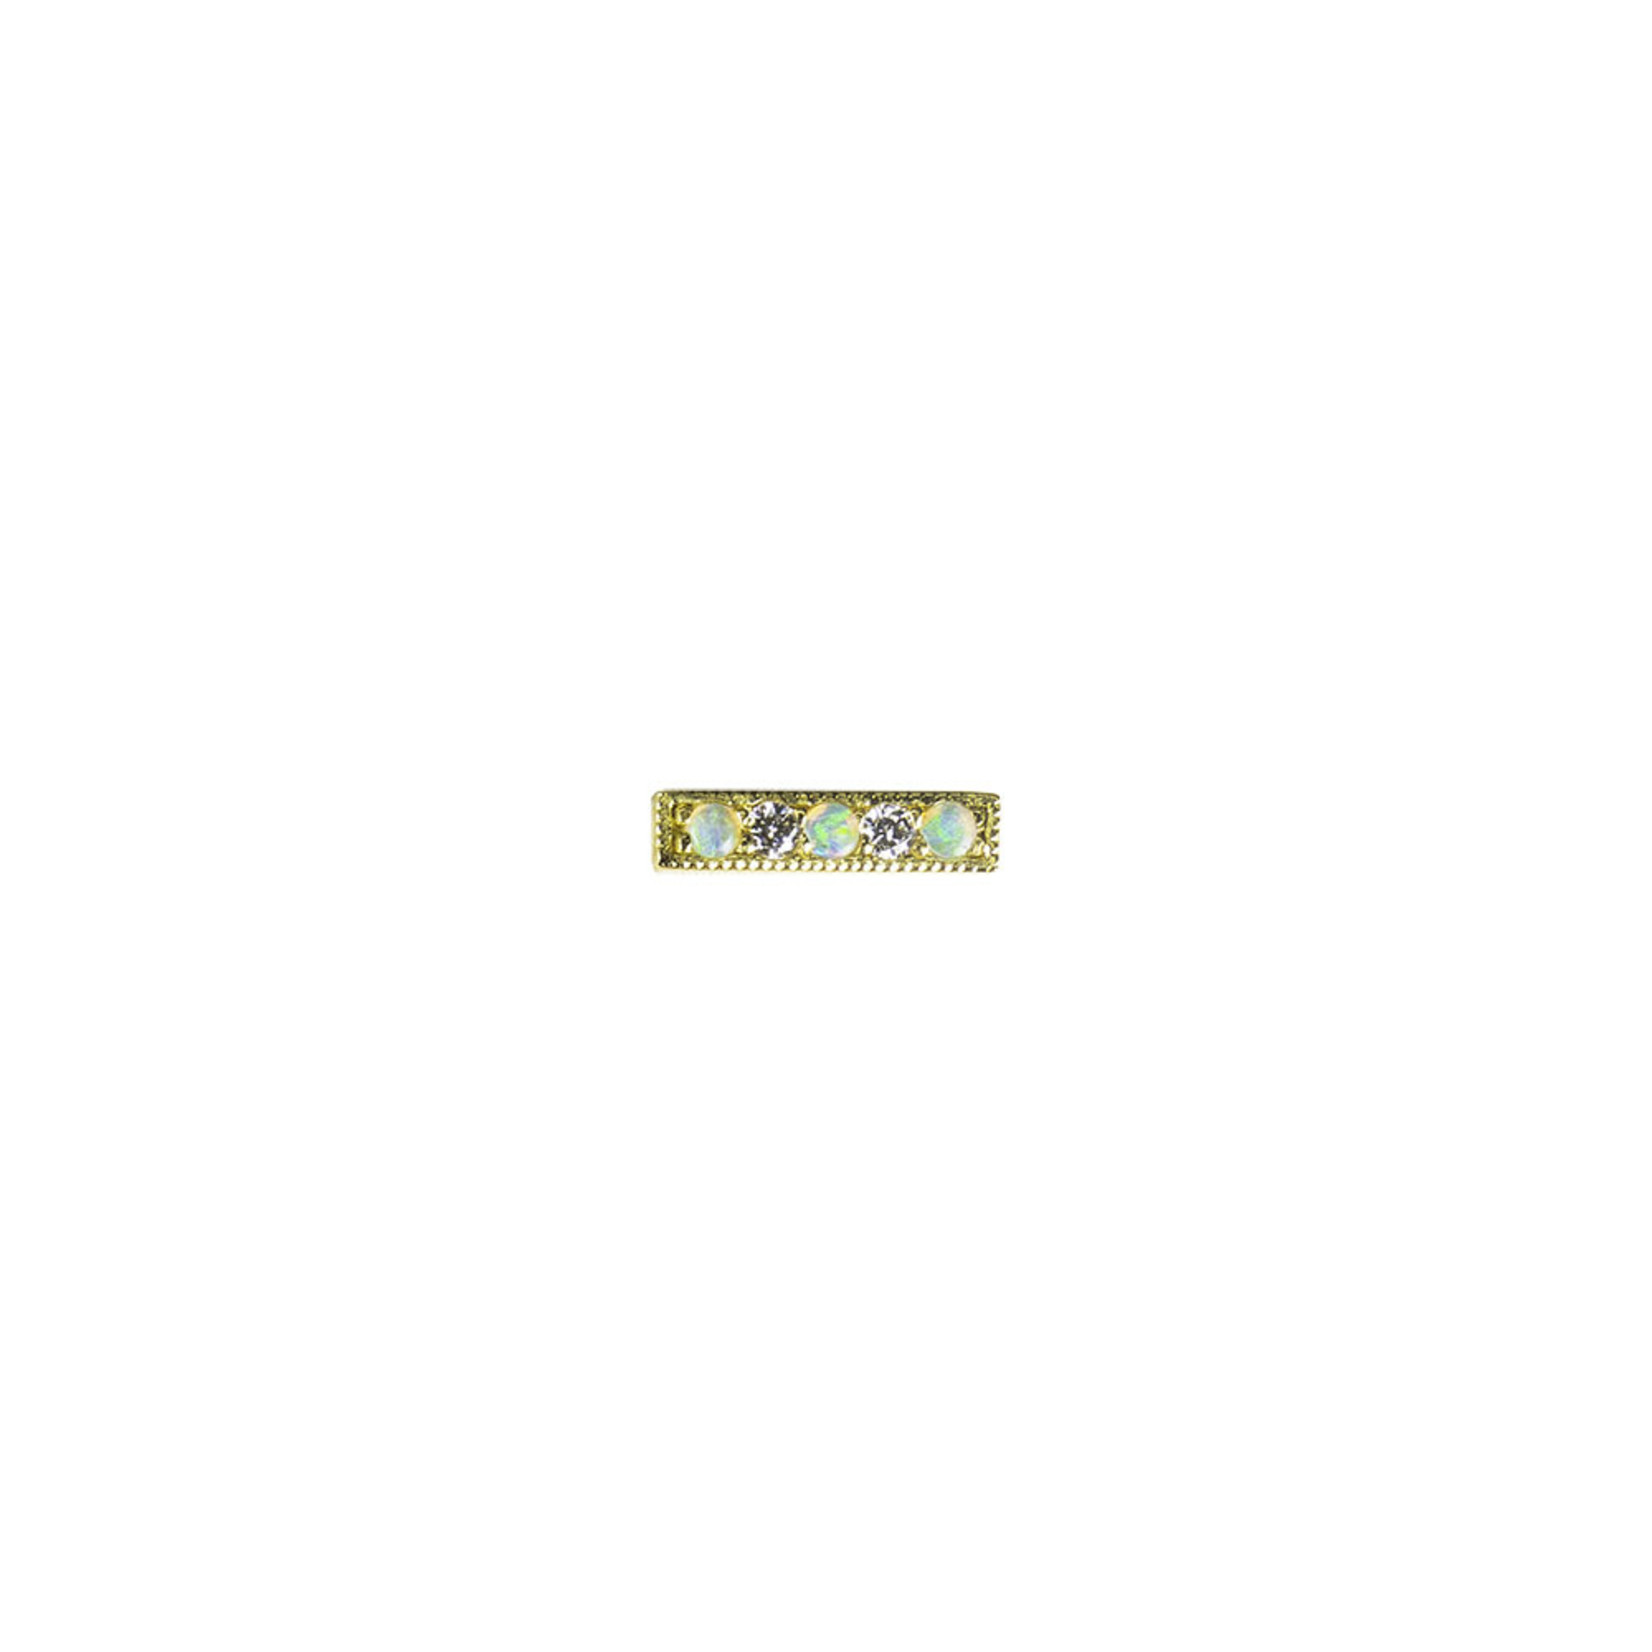 BVLA BVLA yellow gold "Pave gem Strip" with 2x 1.5 VS1 diamond and 3x AAA white opal